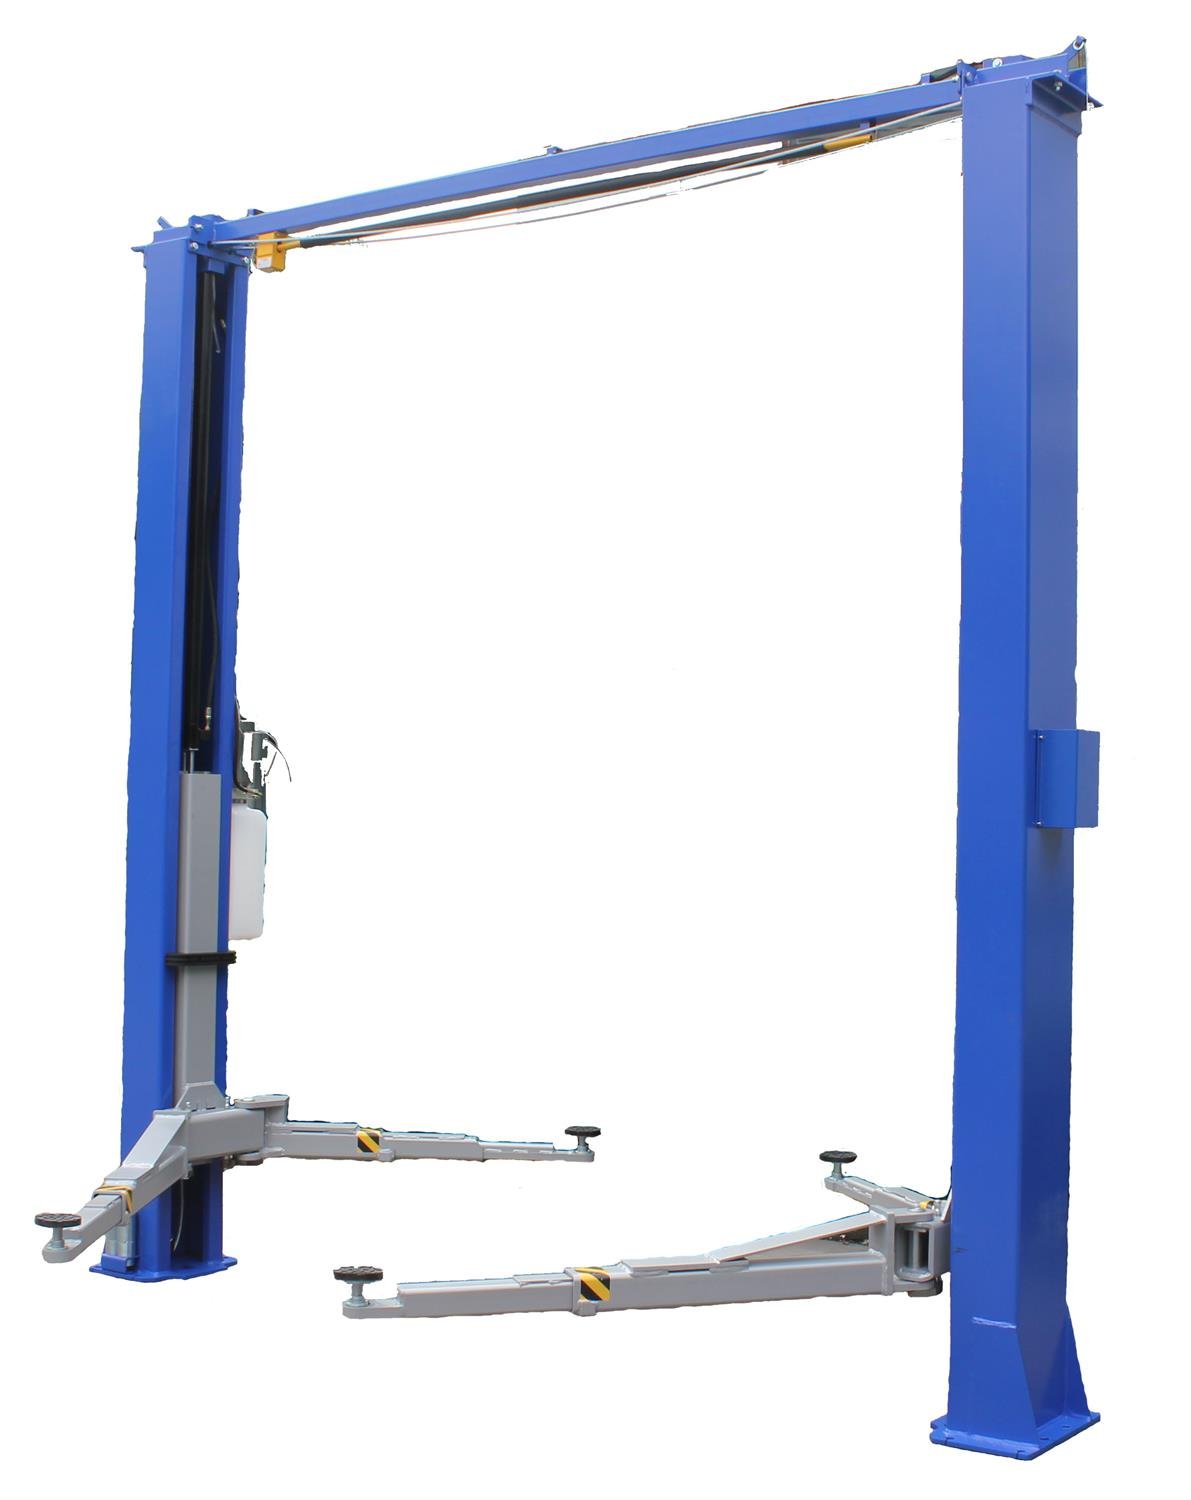 2-Post Bi-symmetrical Automotive Lift with 11,000 lbs. Lifting Capacity with Clear Floor